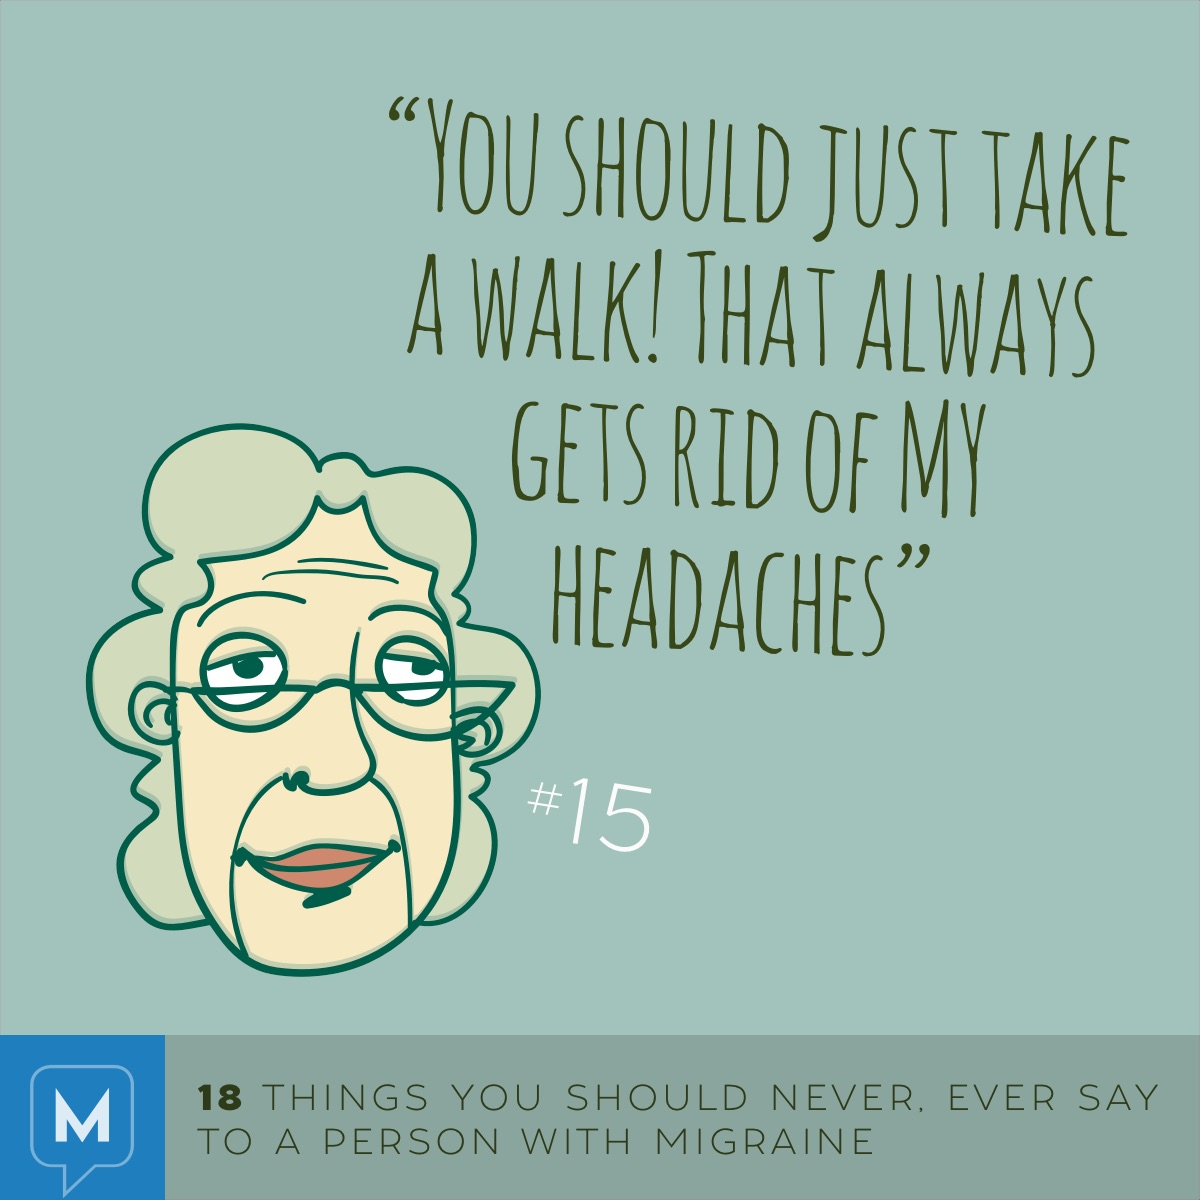 Things not to say to a person with migraine